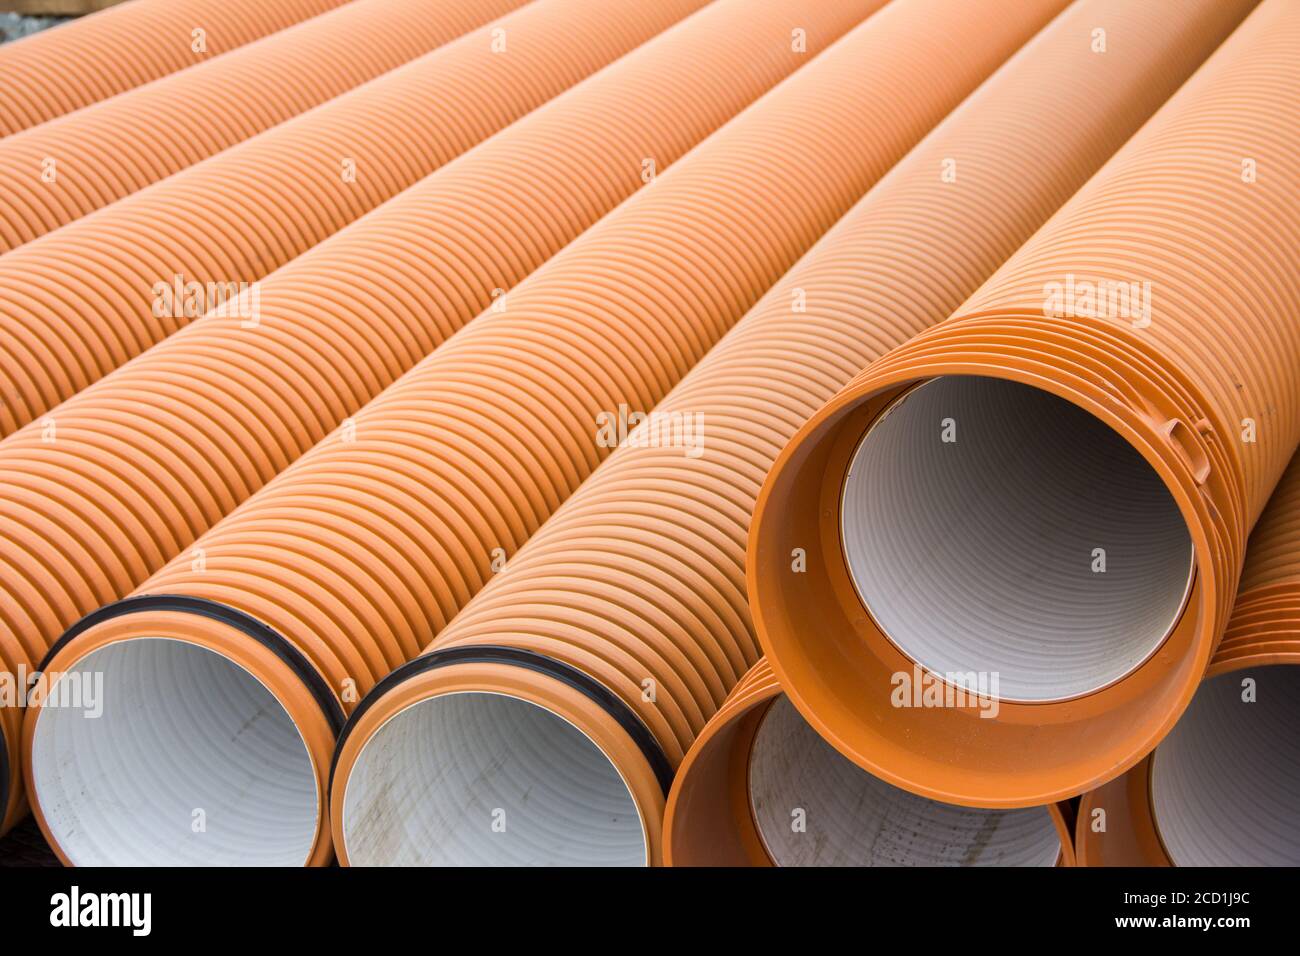 Sewer plastic pipes of orange color at a construction site. Construction  Materials. Pipes for water supply Stock Photo - Alamy